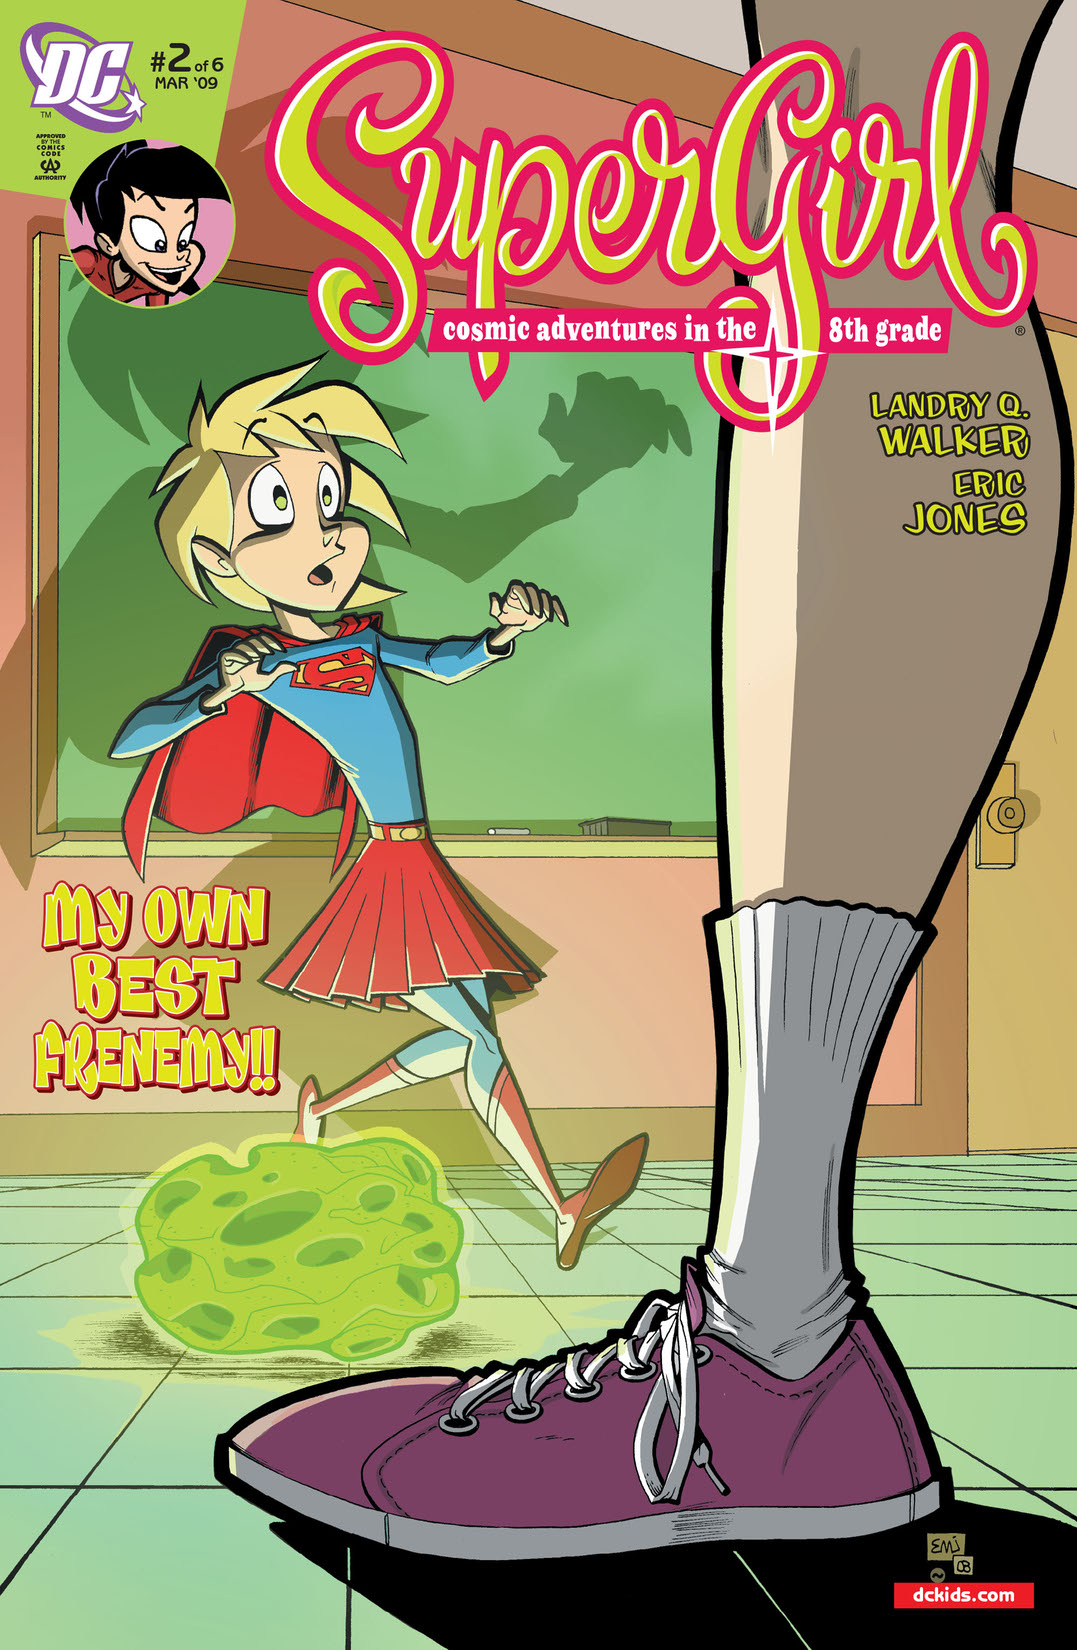 Supergirl: Cosmic Adventures in the 8th Grade #2 preview images